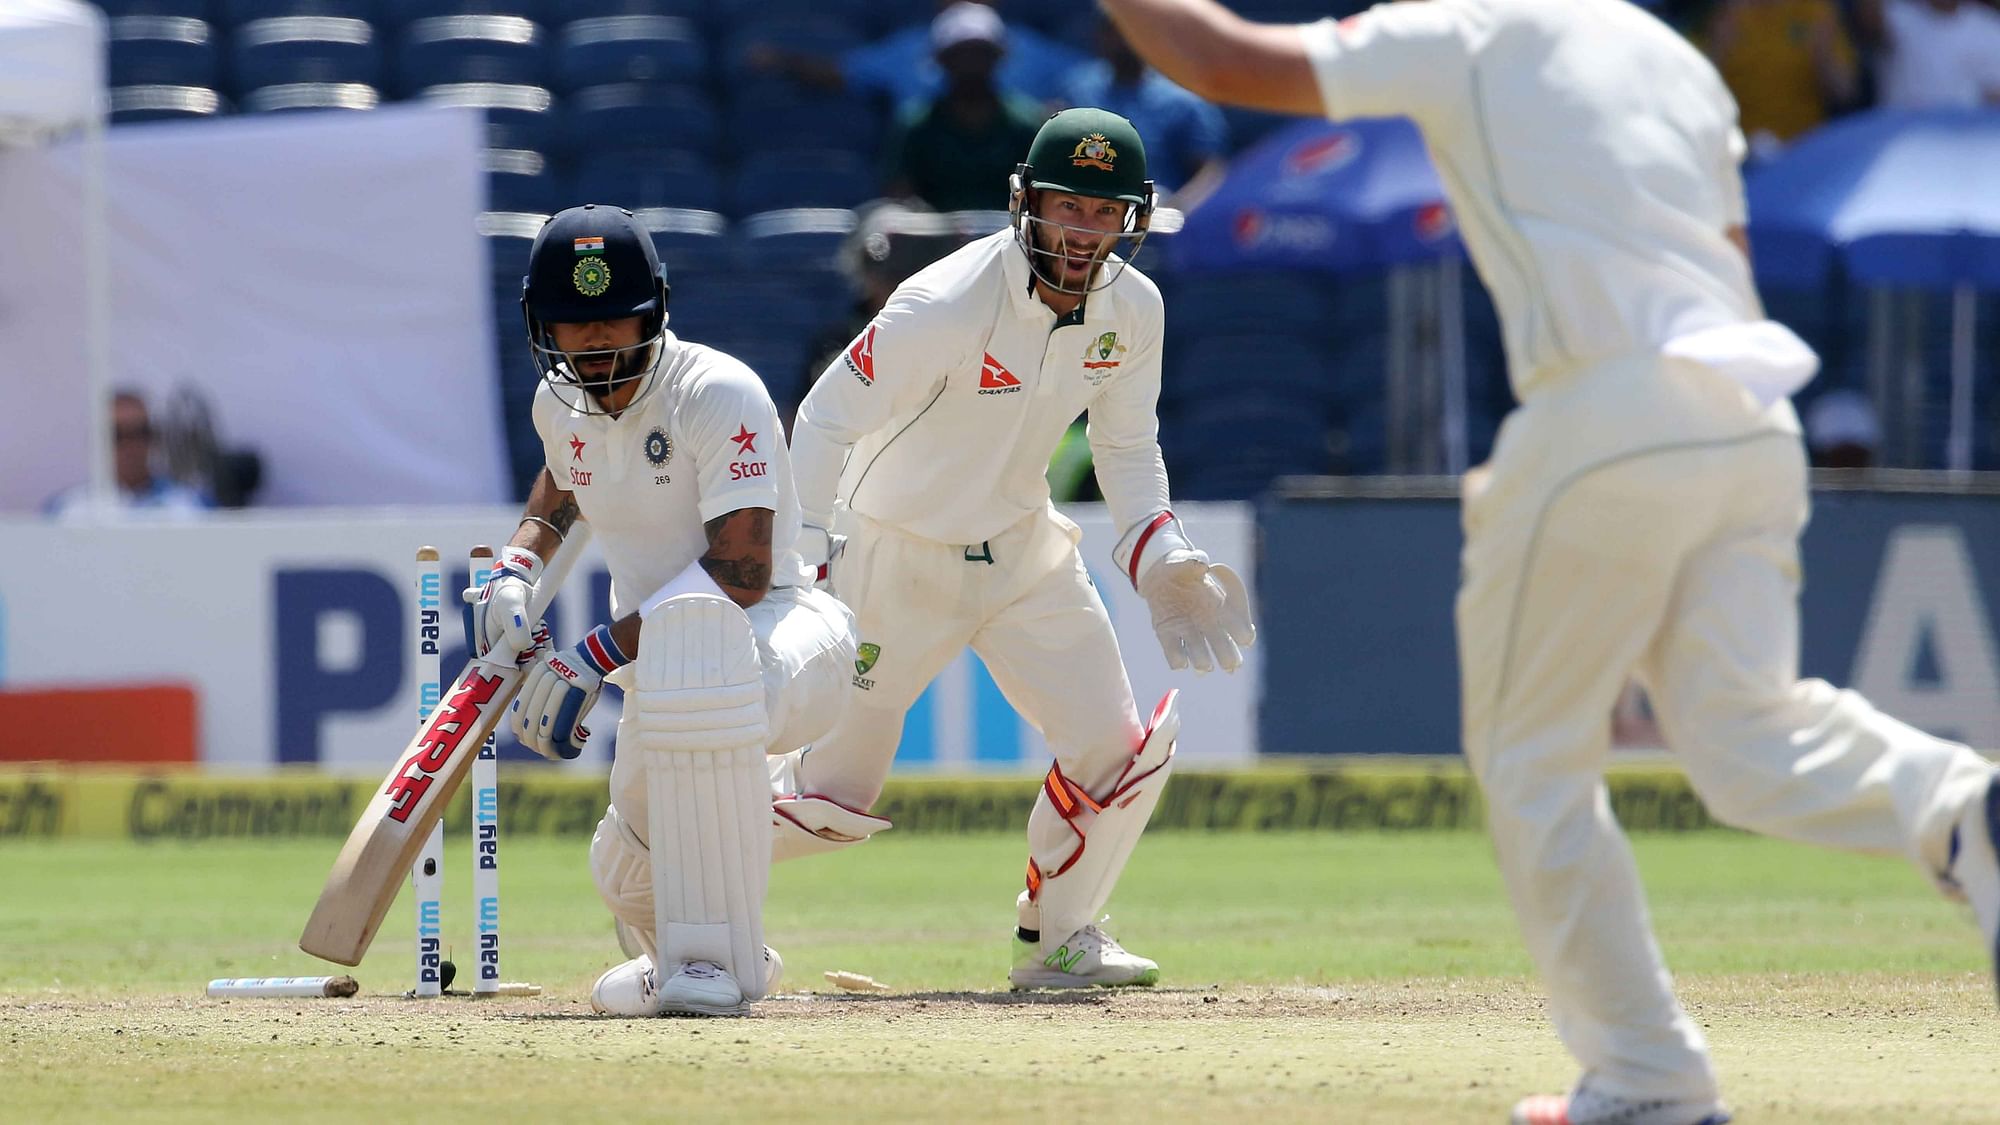 Virat Kohli was clean bowled by Steve O’Keefe in the second innings of the Pune Test. (Photo: AP)